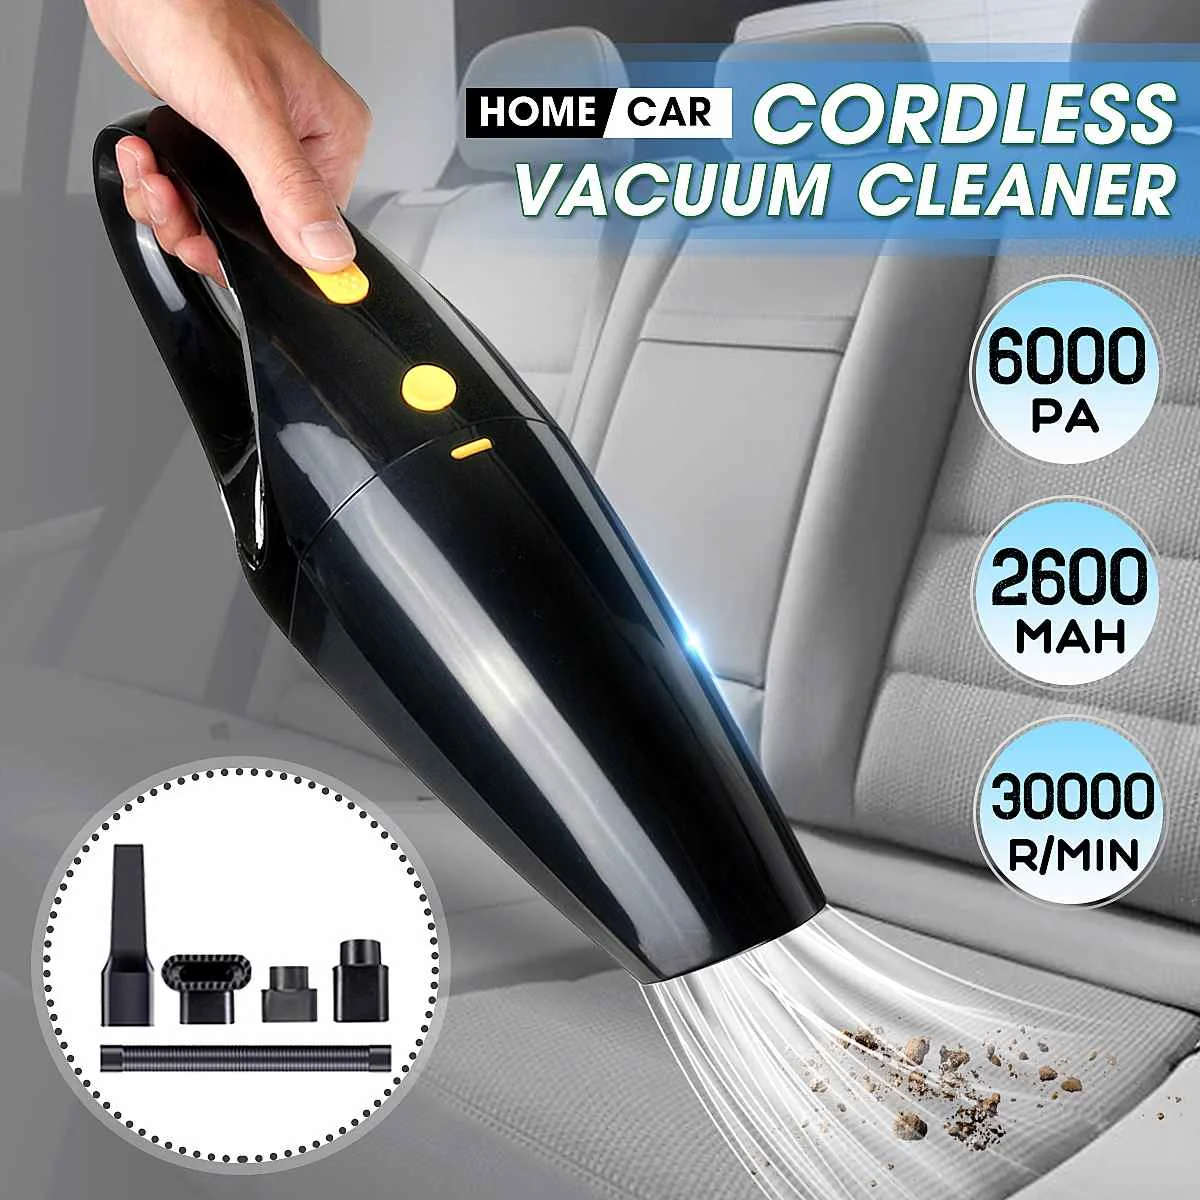 

6000PA 12V 120W Handheld Cordless Car Vacuum Cleaner Wet and Dry Dual Use Dust Collector Auto Portable Cleaner Cleaning Tools